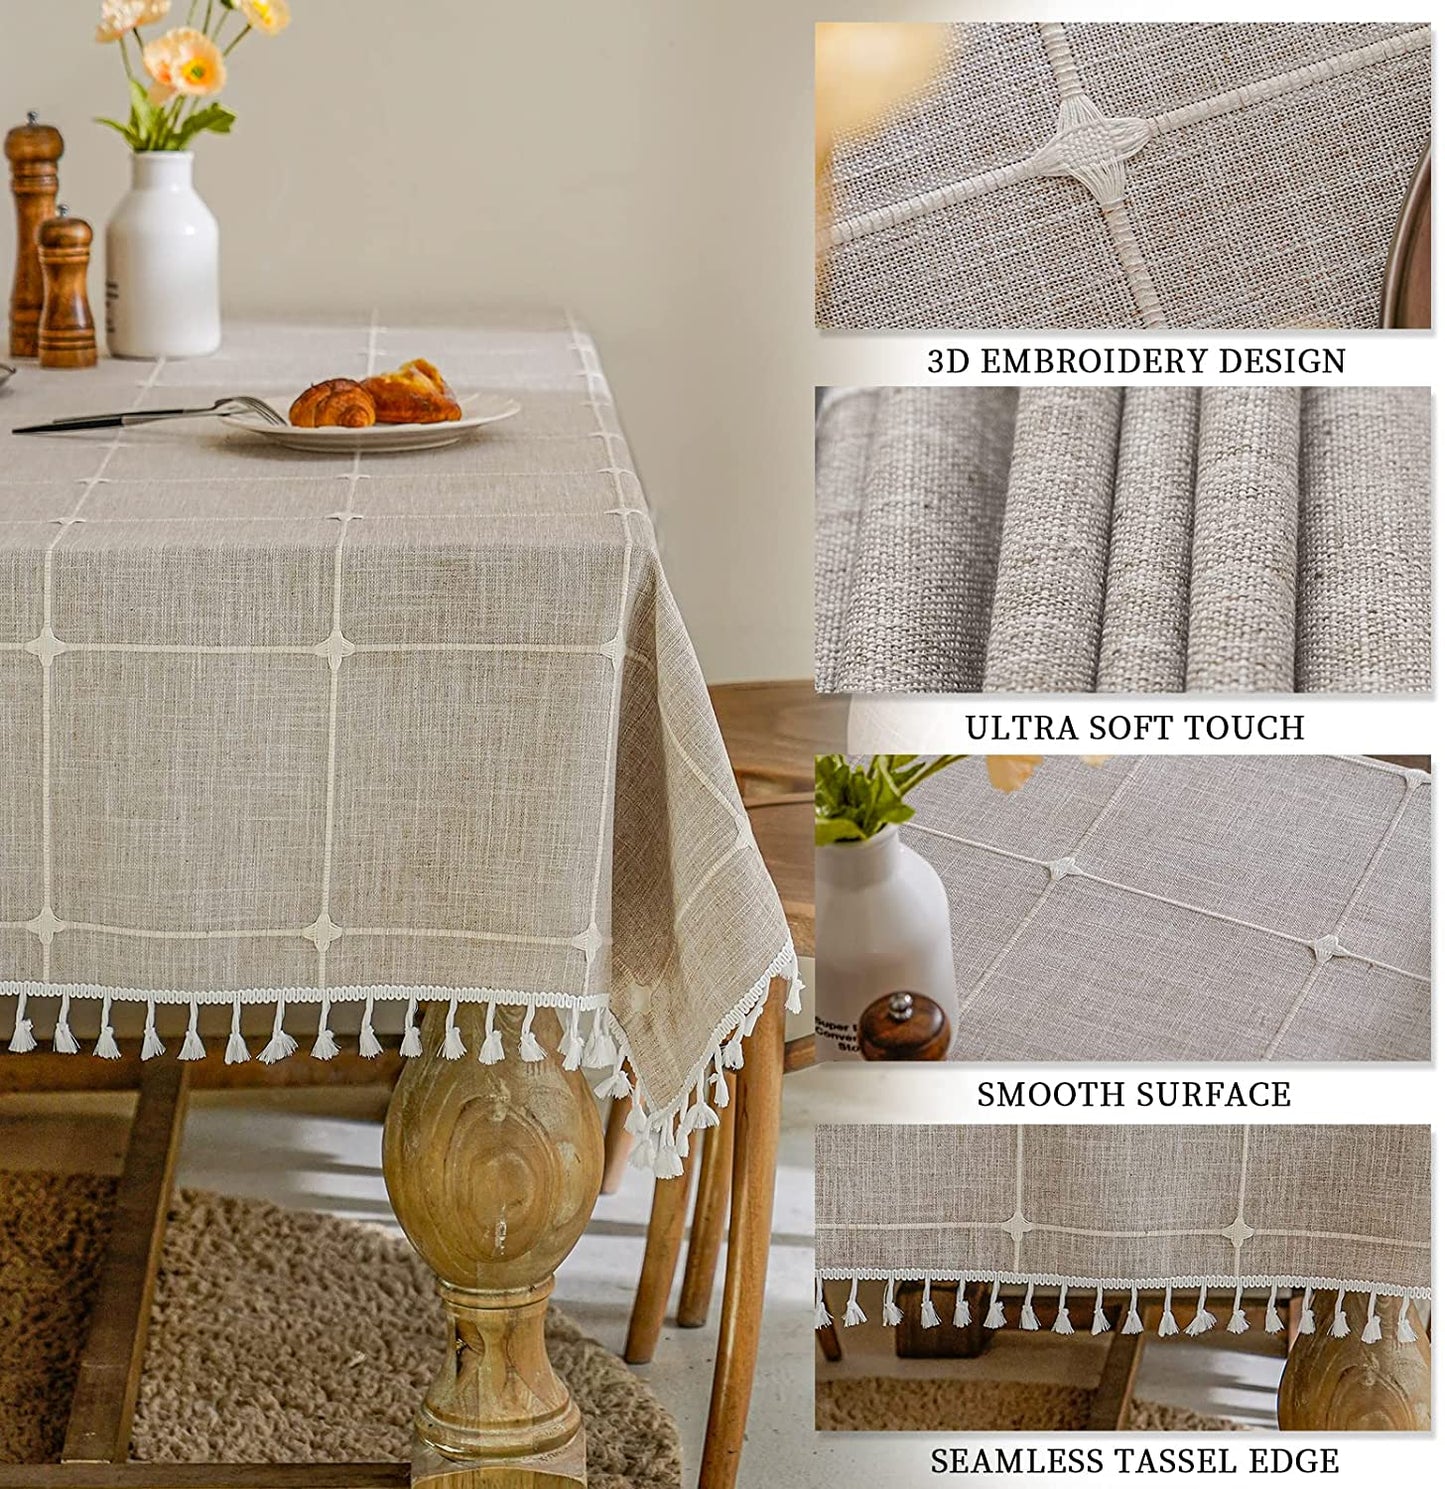 Mokani Solid Embroidery Checkered Table Cloth Washable Cotton Linen Tassel Tablecloth, Rectangle Wrinkle Free Anti-Fading Table Cover for Kitchen Dinning Thanksgiving Christmas (55 x 102 Inch, Brown) - (For 6 piece(s))